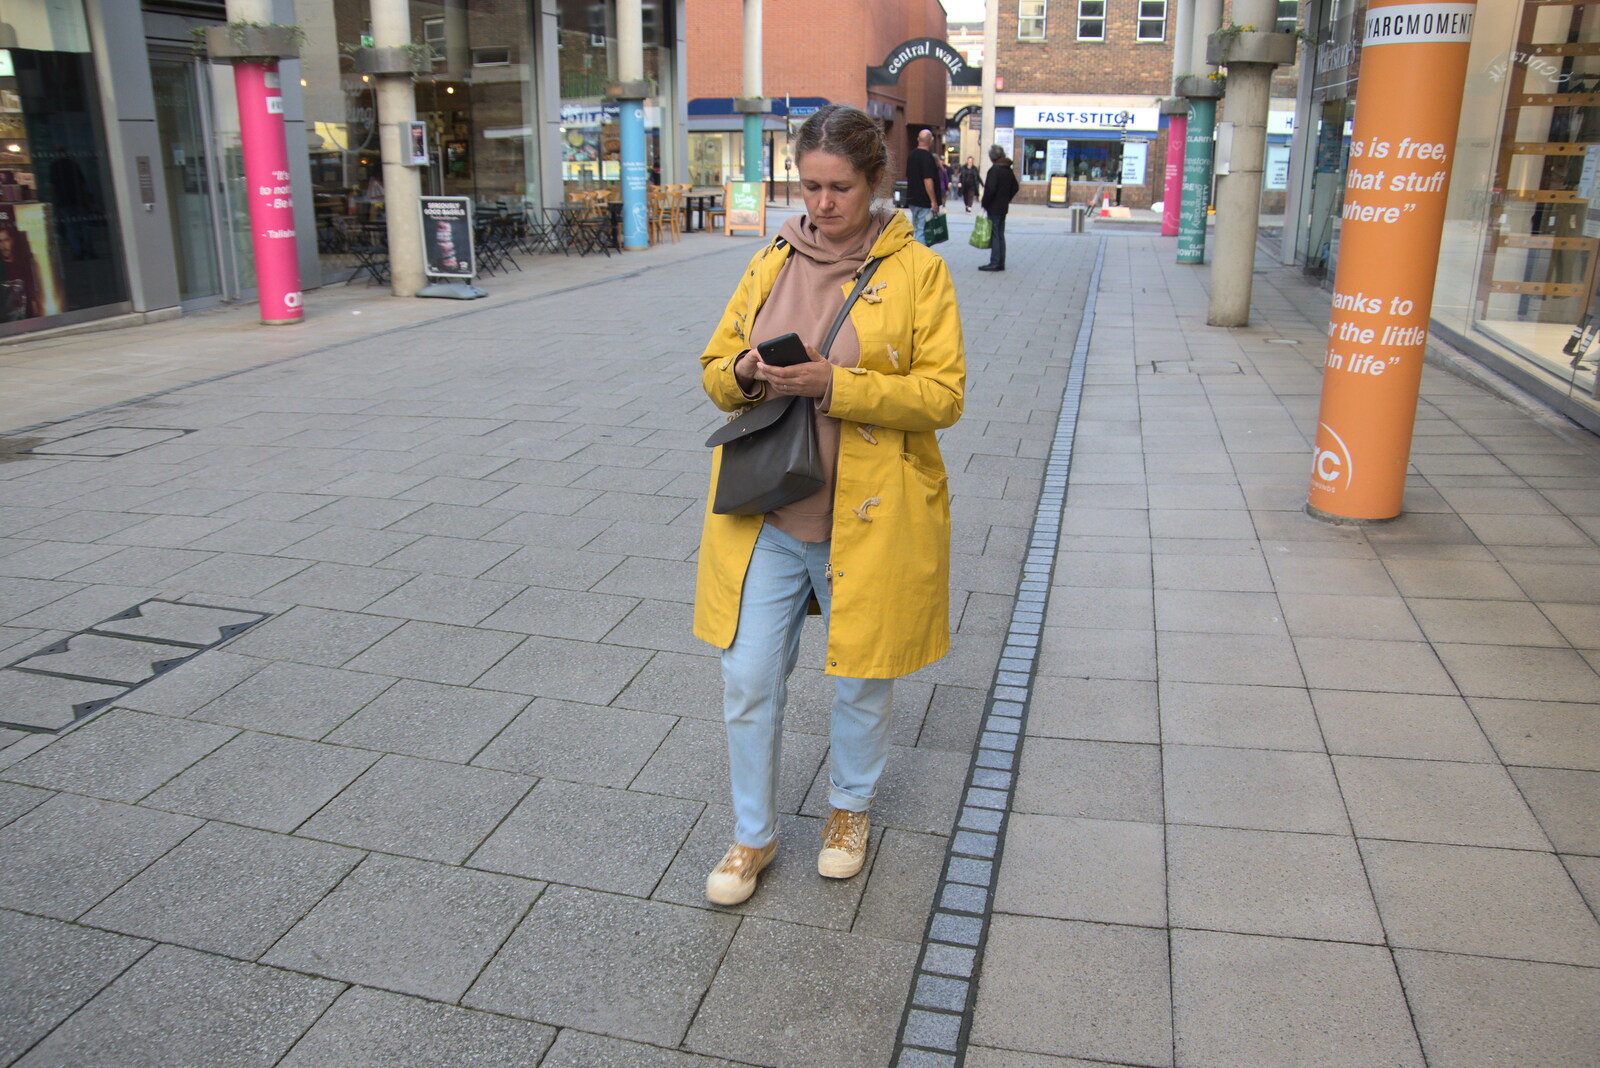 Pizza and Pasta in Bury St. Edmunds, Suffolk - 30th October 2022: Isobel checks her phone